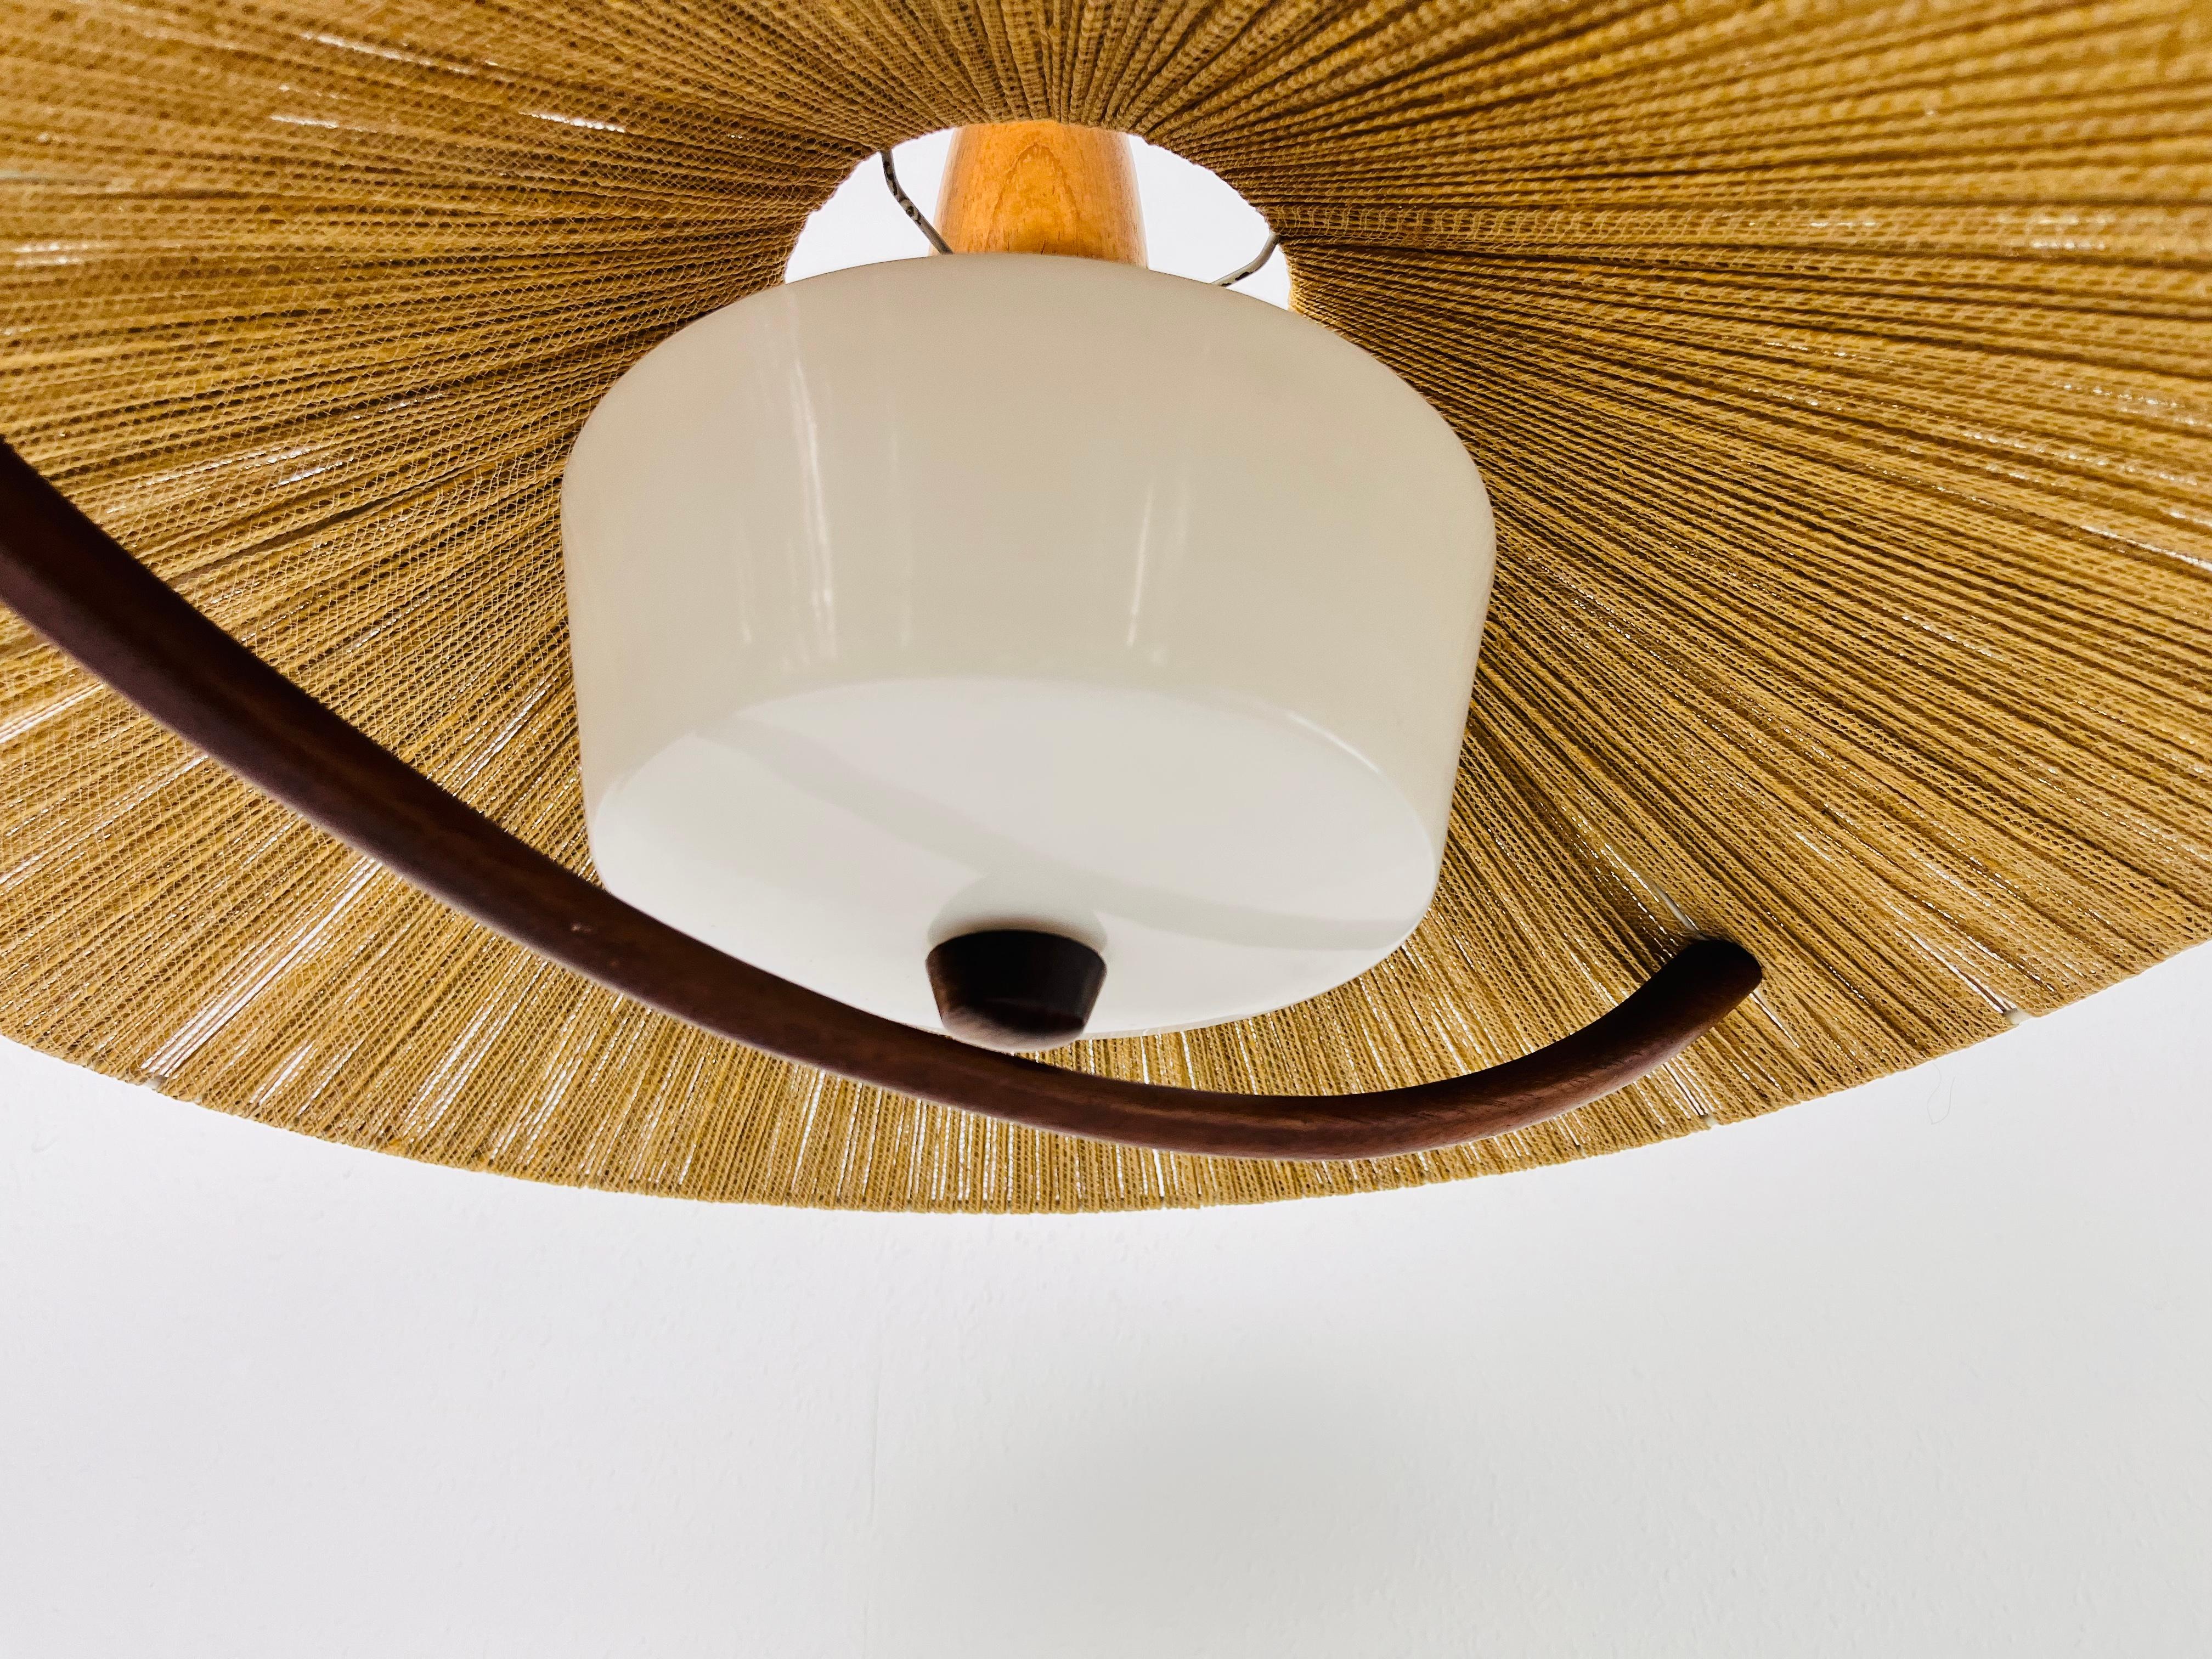 Mid-20th Century Midcentury Teak and Cord Shade Hanging Lamp by Temde, circa 1960